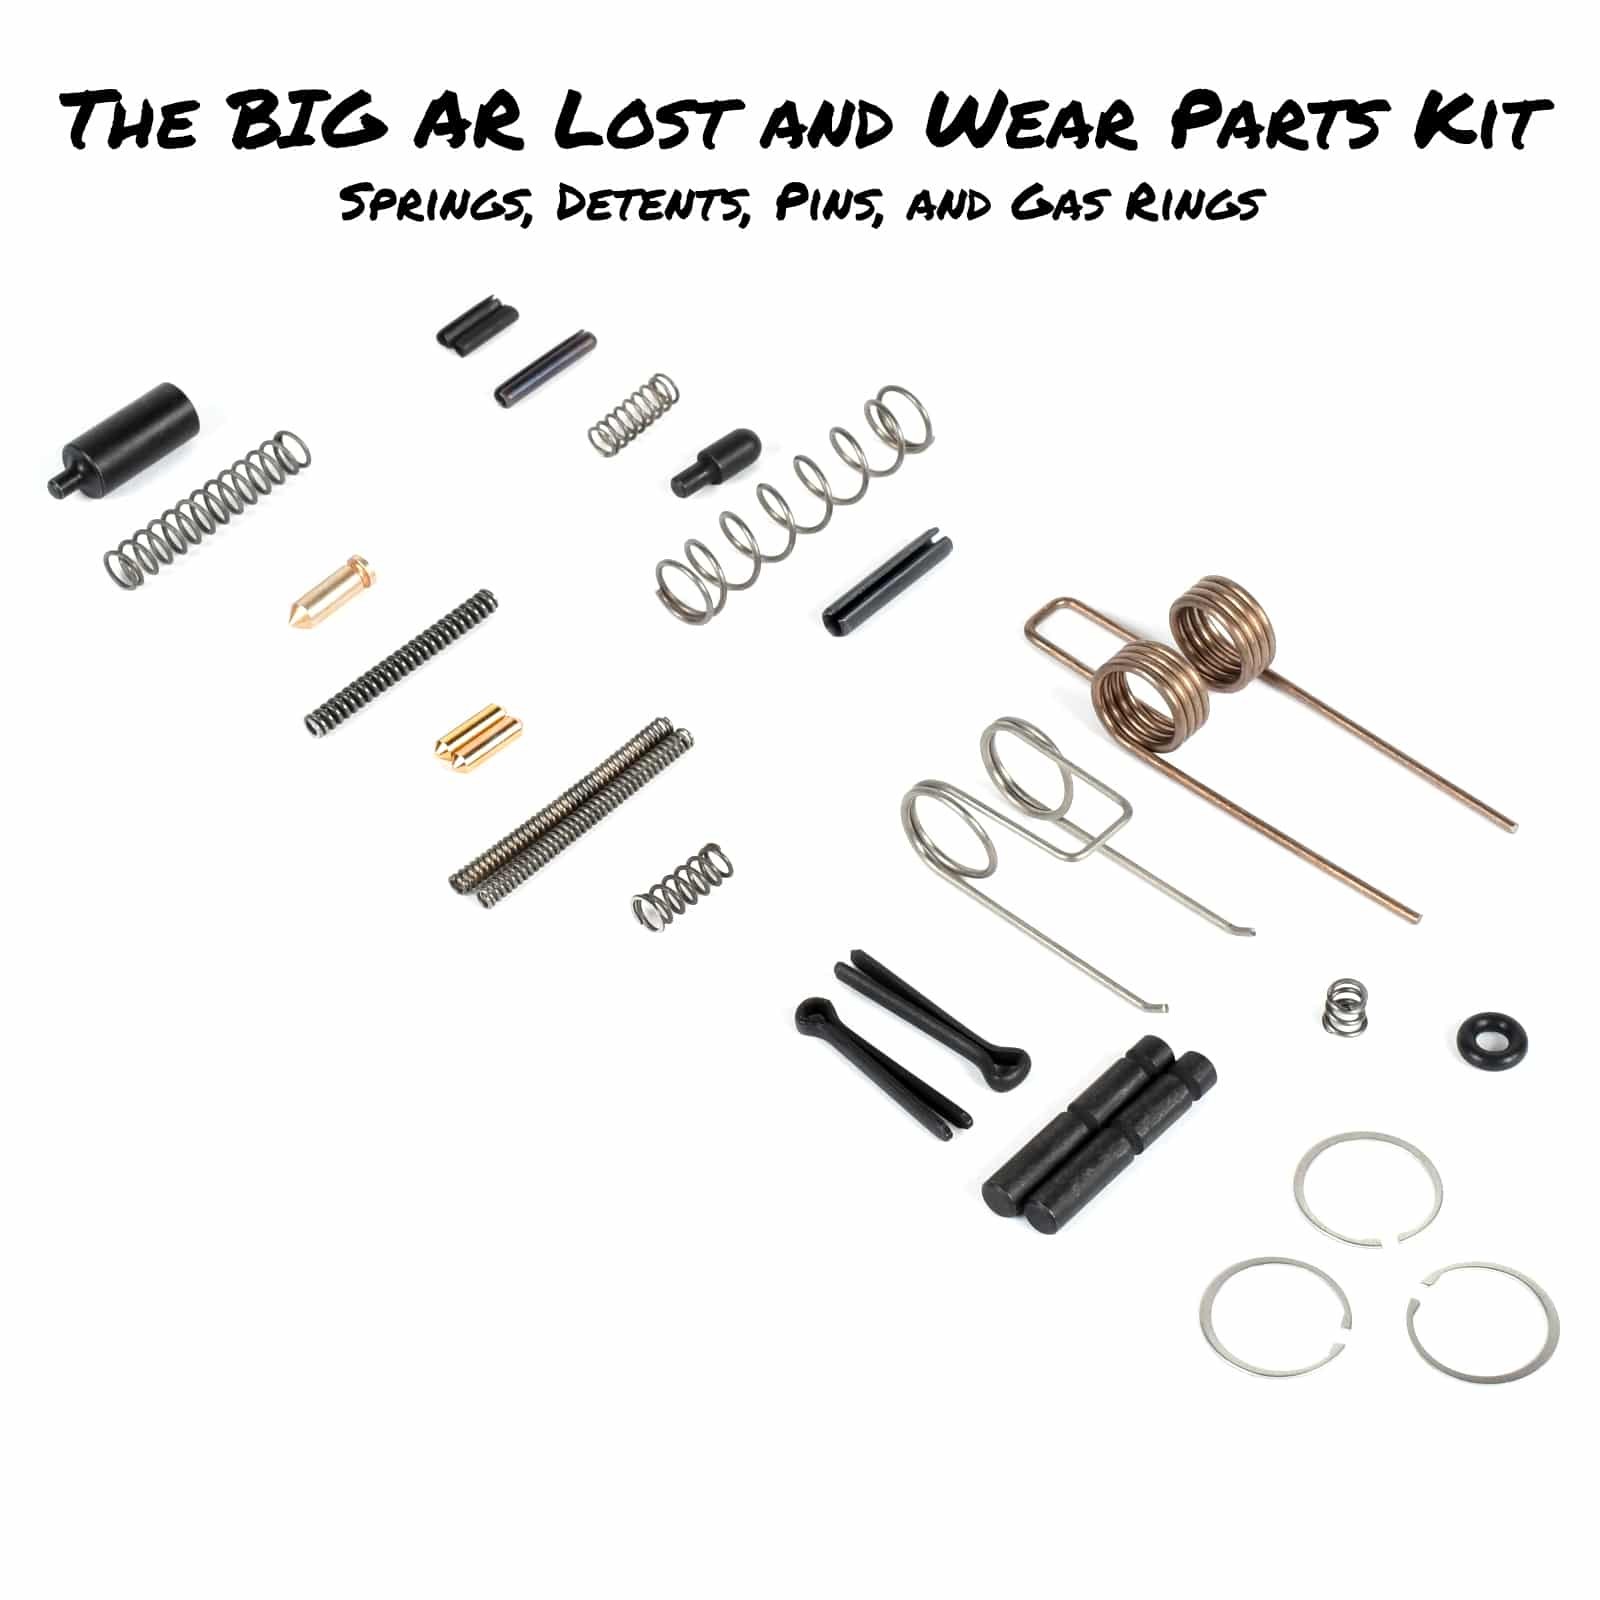 AT3™ MOTHERFU-BAG™ - The BIG AR-15 Lost Parts Kit - Springs, Detents, Wear Parts, and More